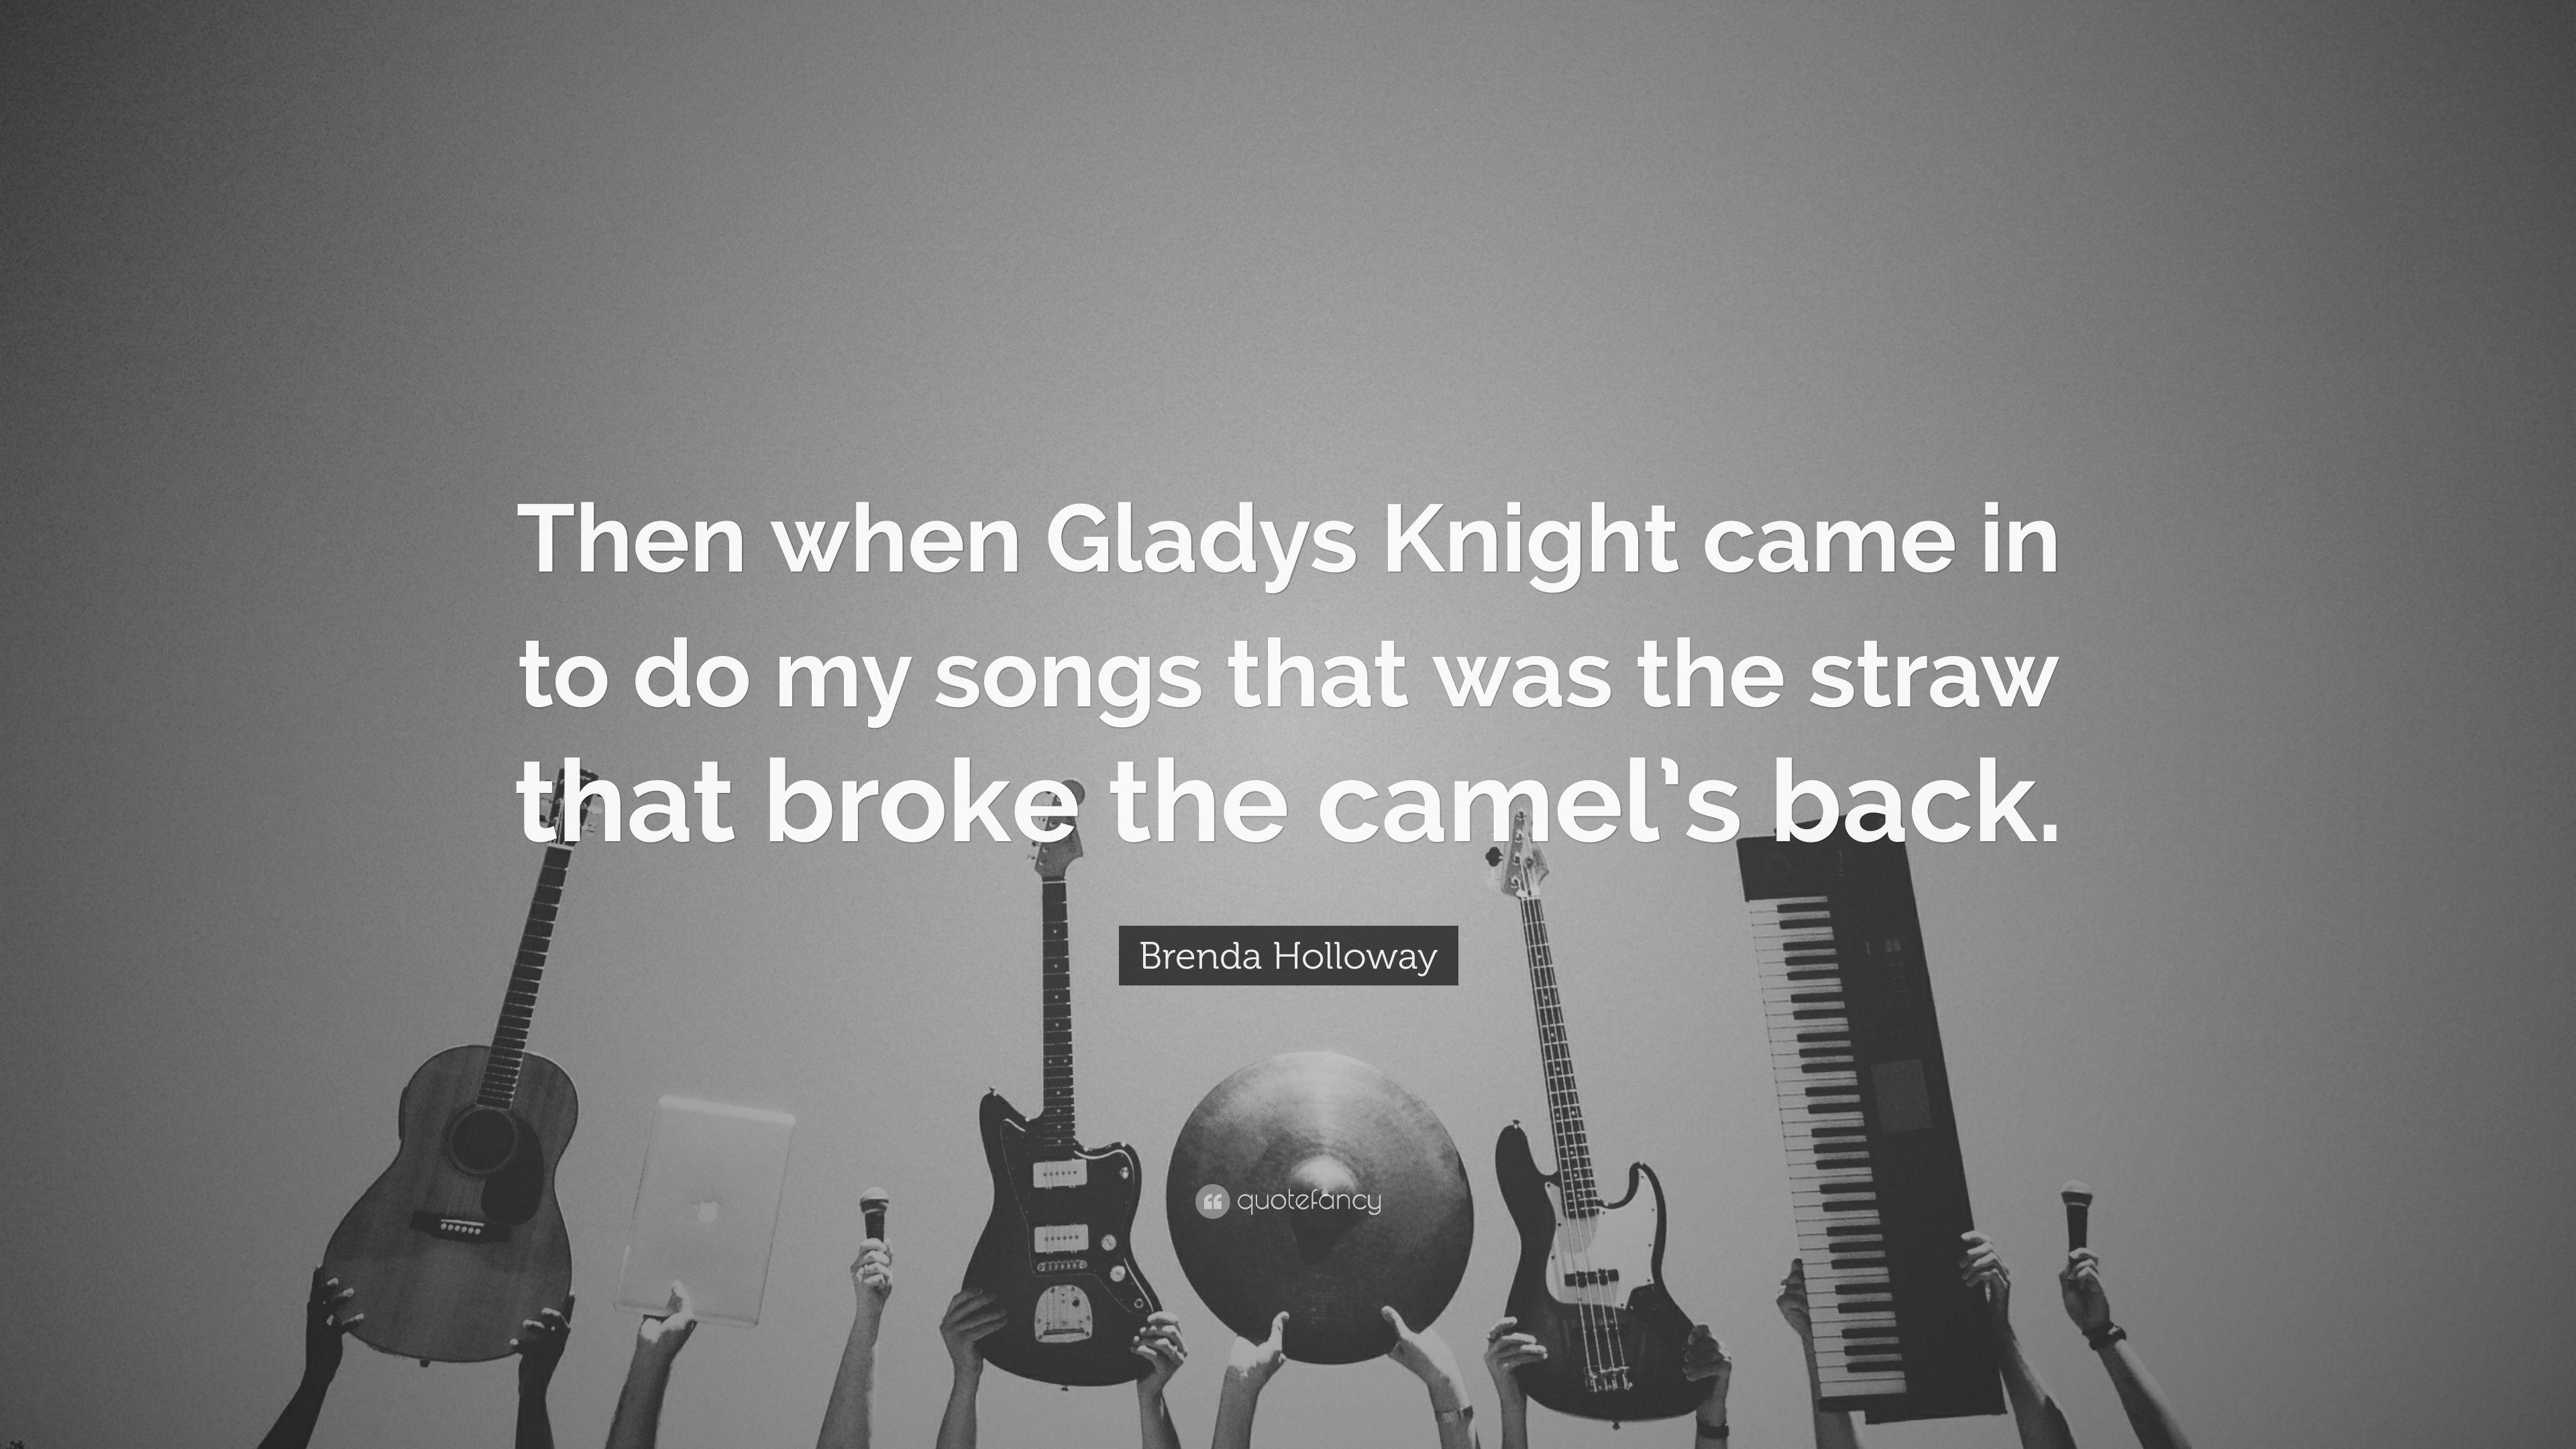 Brenda Holloway Quote: “Then when Gladys Knight came in to do my